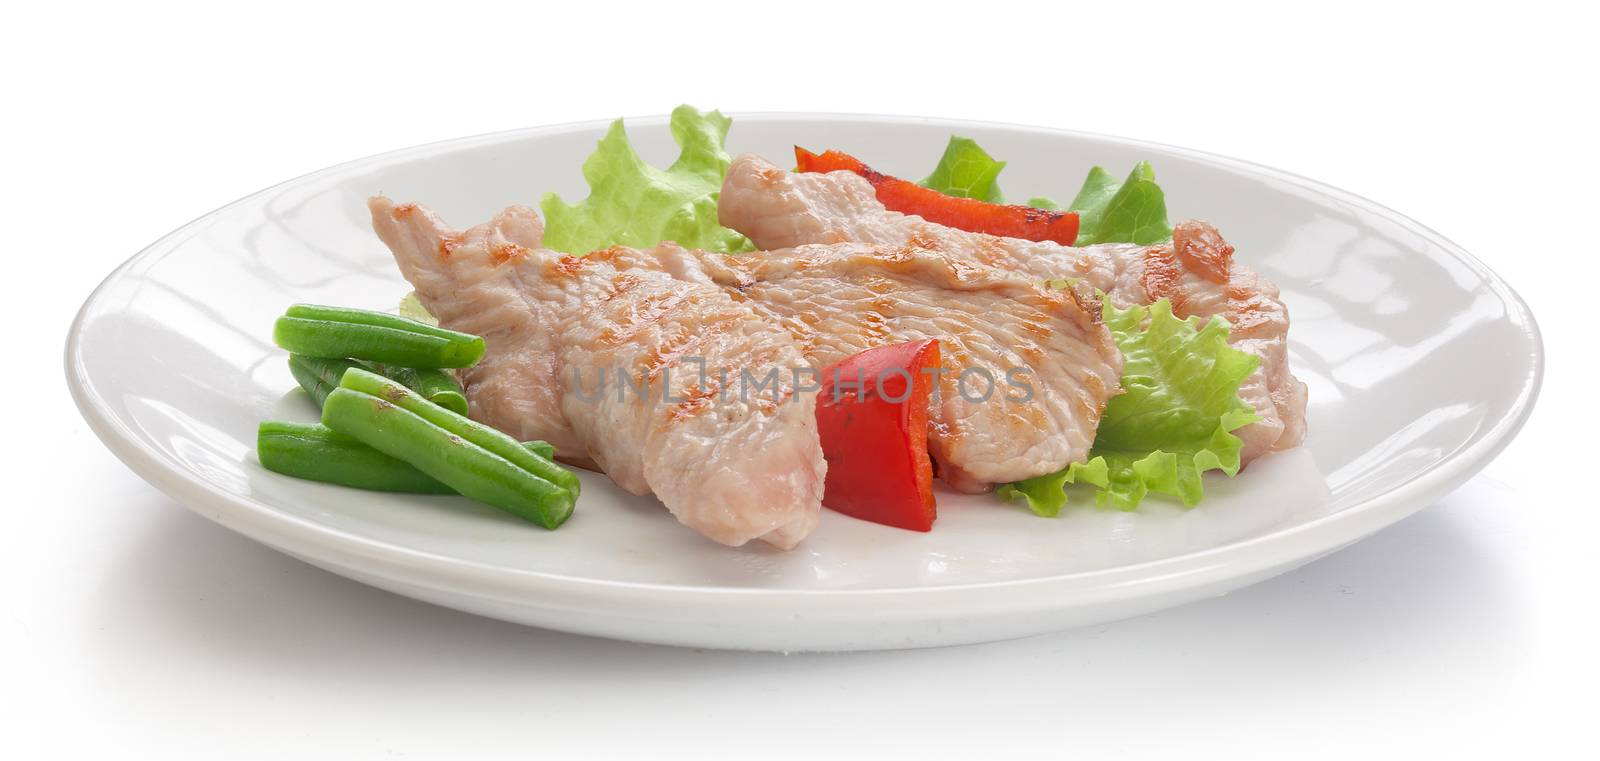 Three roasted pieces of turkey with green lettuce, kidney bean and red pepper on the white plate